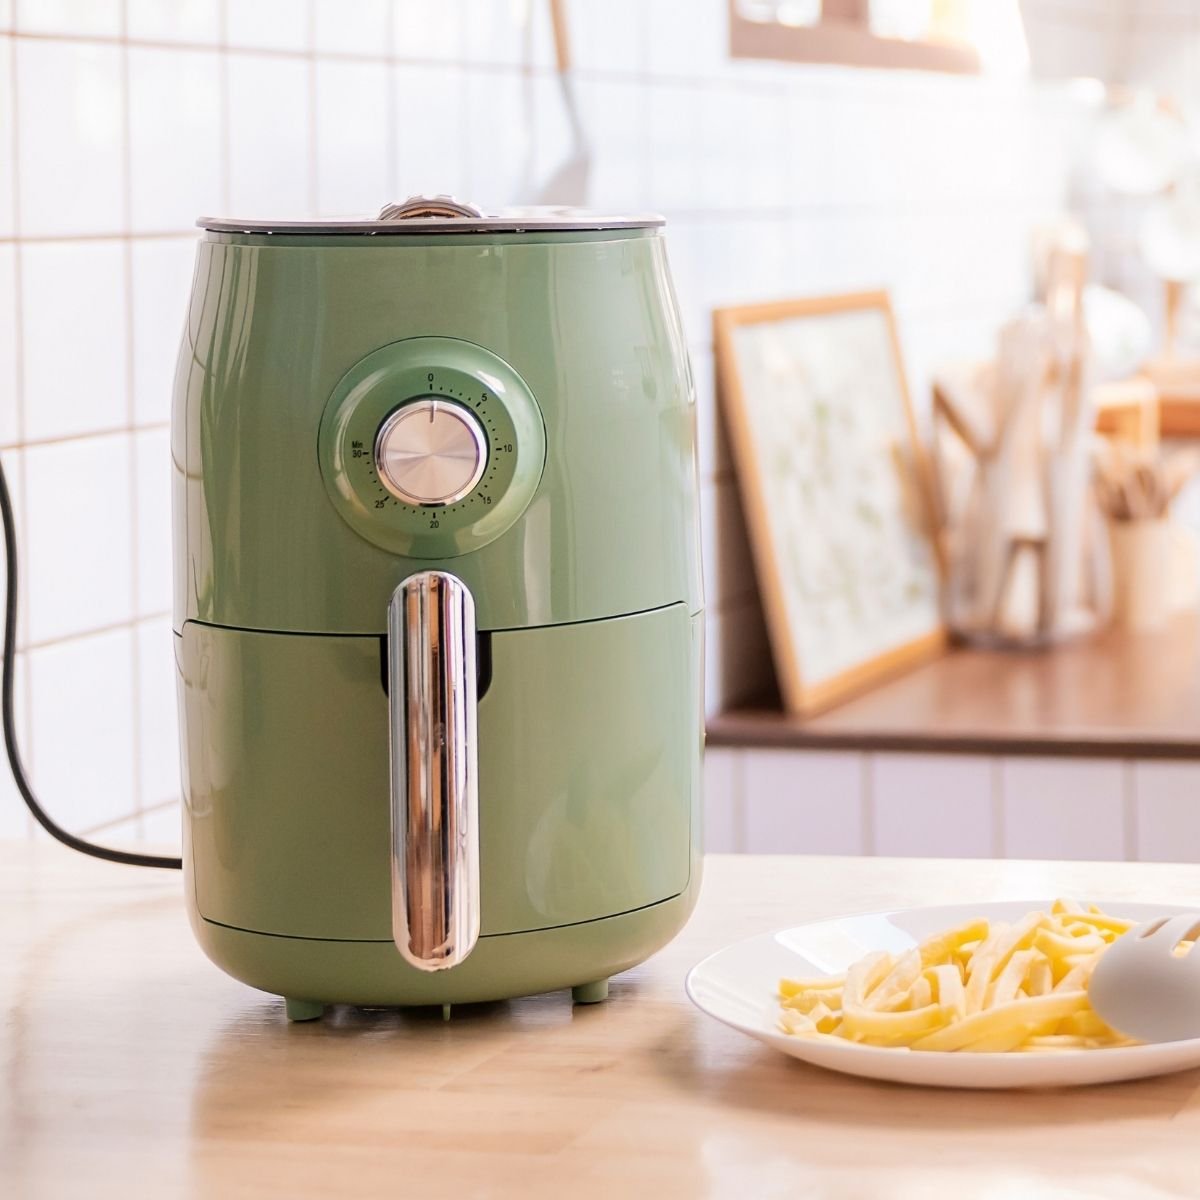 7 Benefits of An Air Fryer: Why You Need One